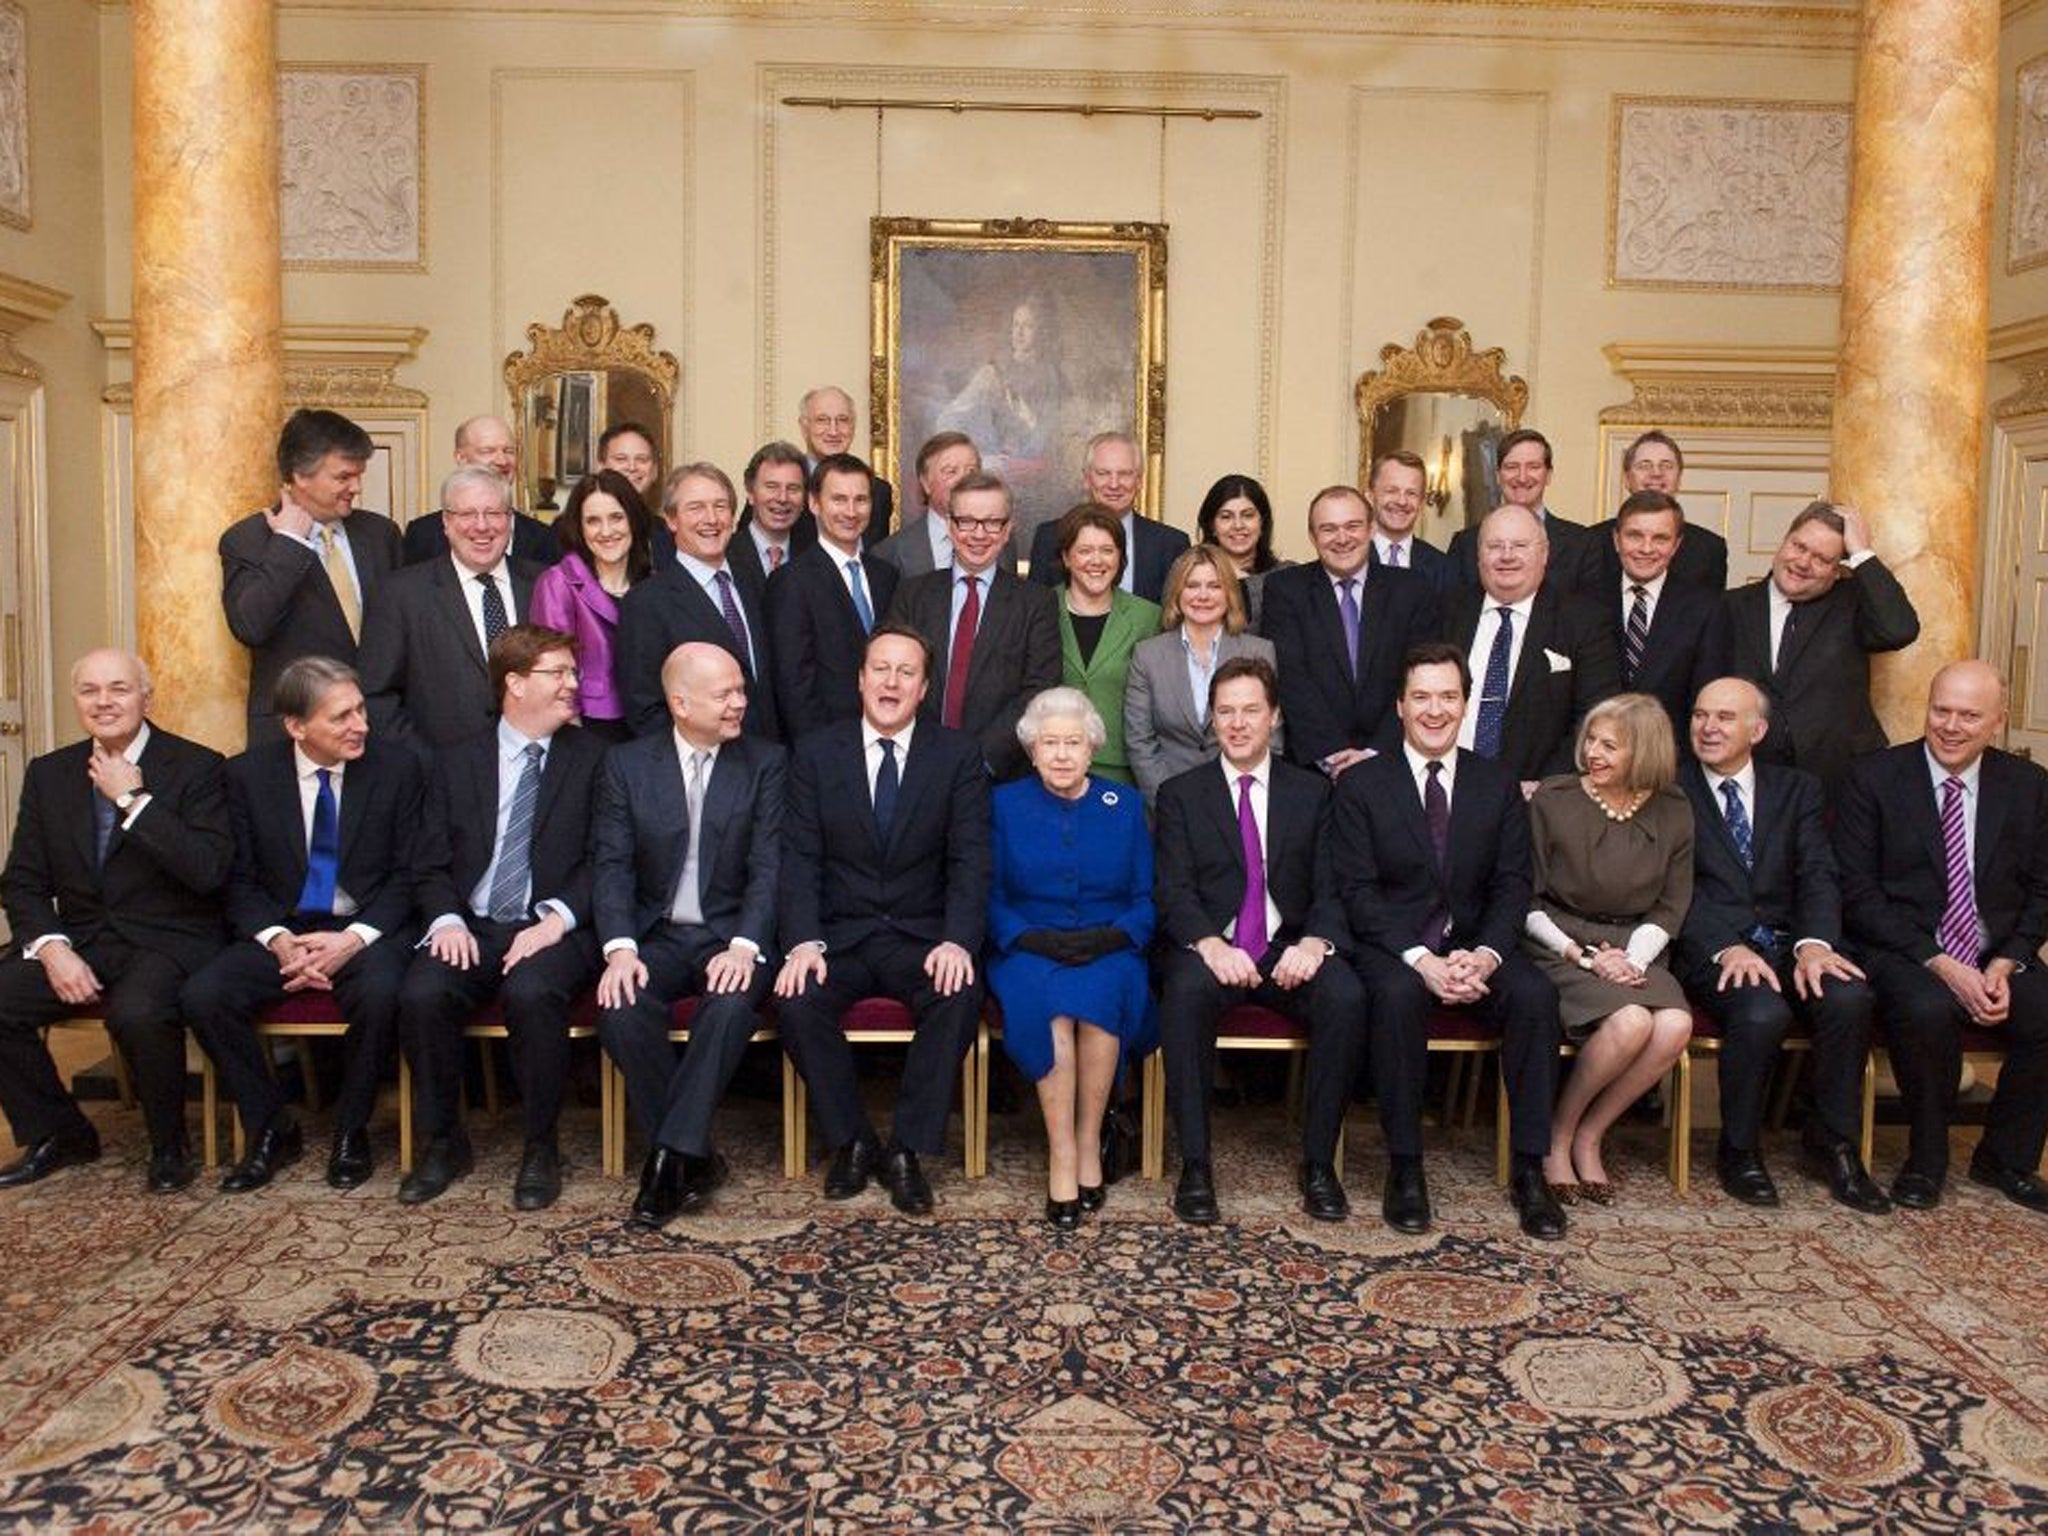 The Queen sits among members of the Cabinet today, flanked by David Cameron and Nick Clegg